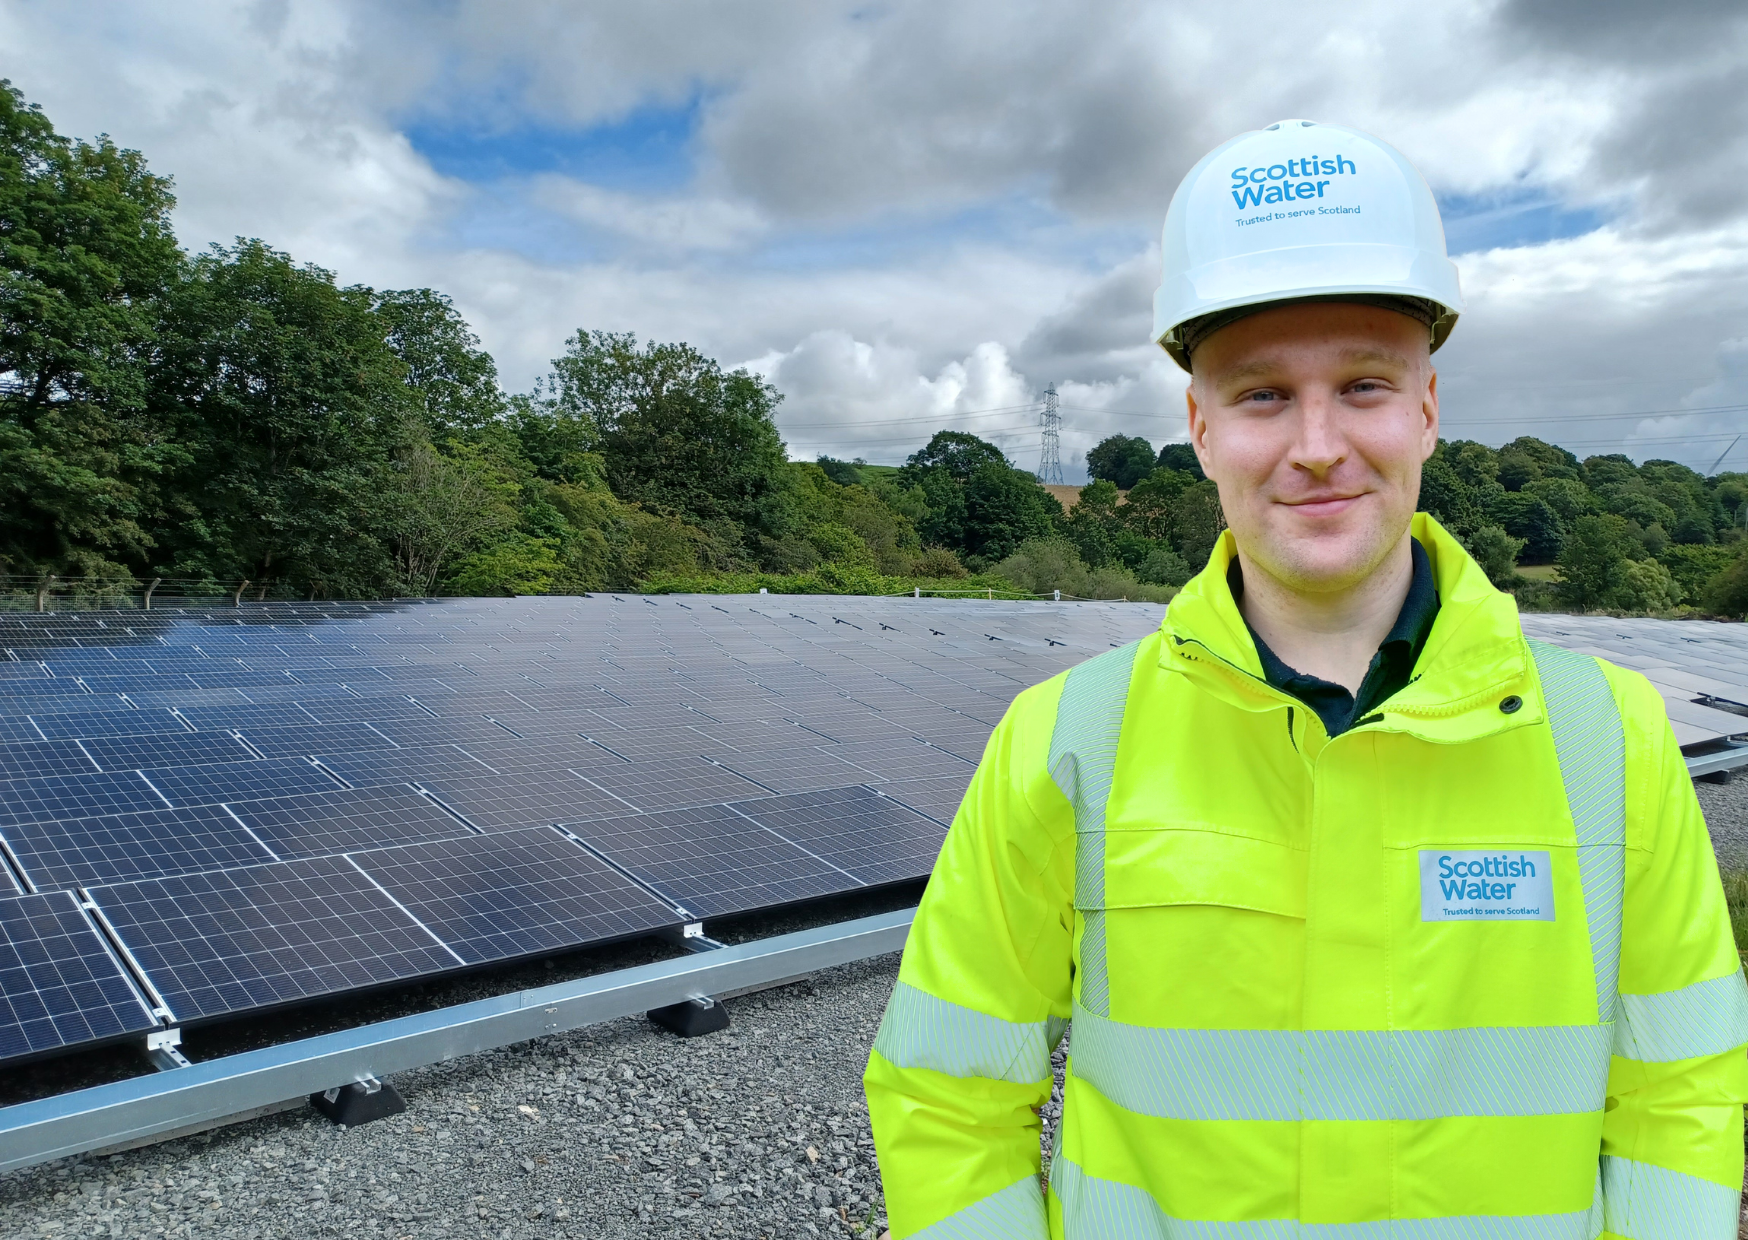 Graduate engineer celebrates first solar install at Denny waste water works